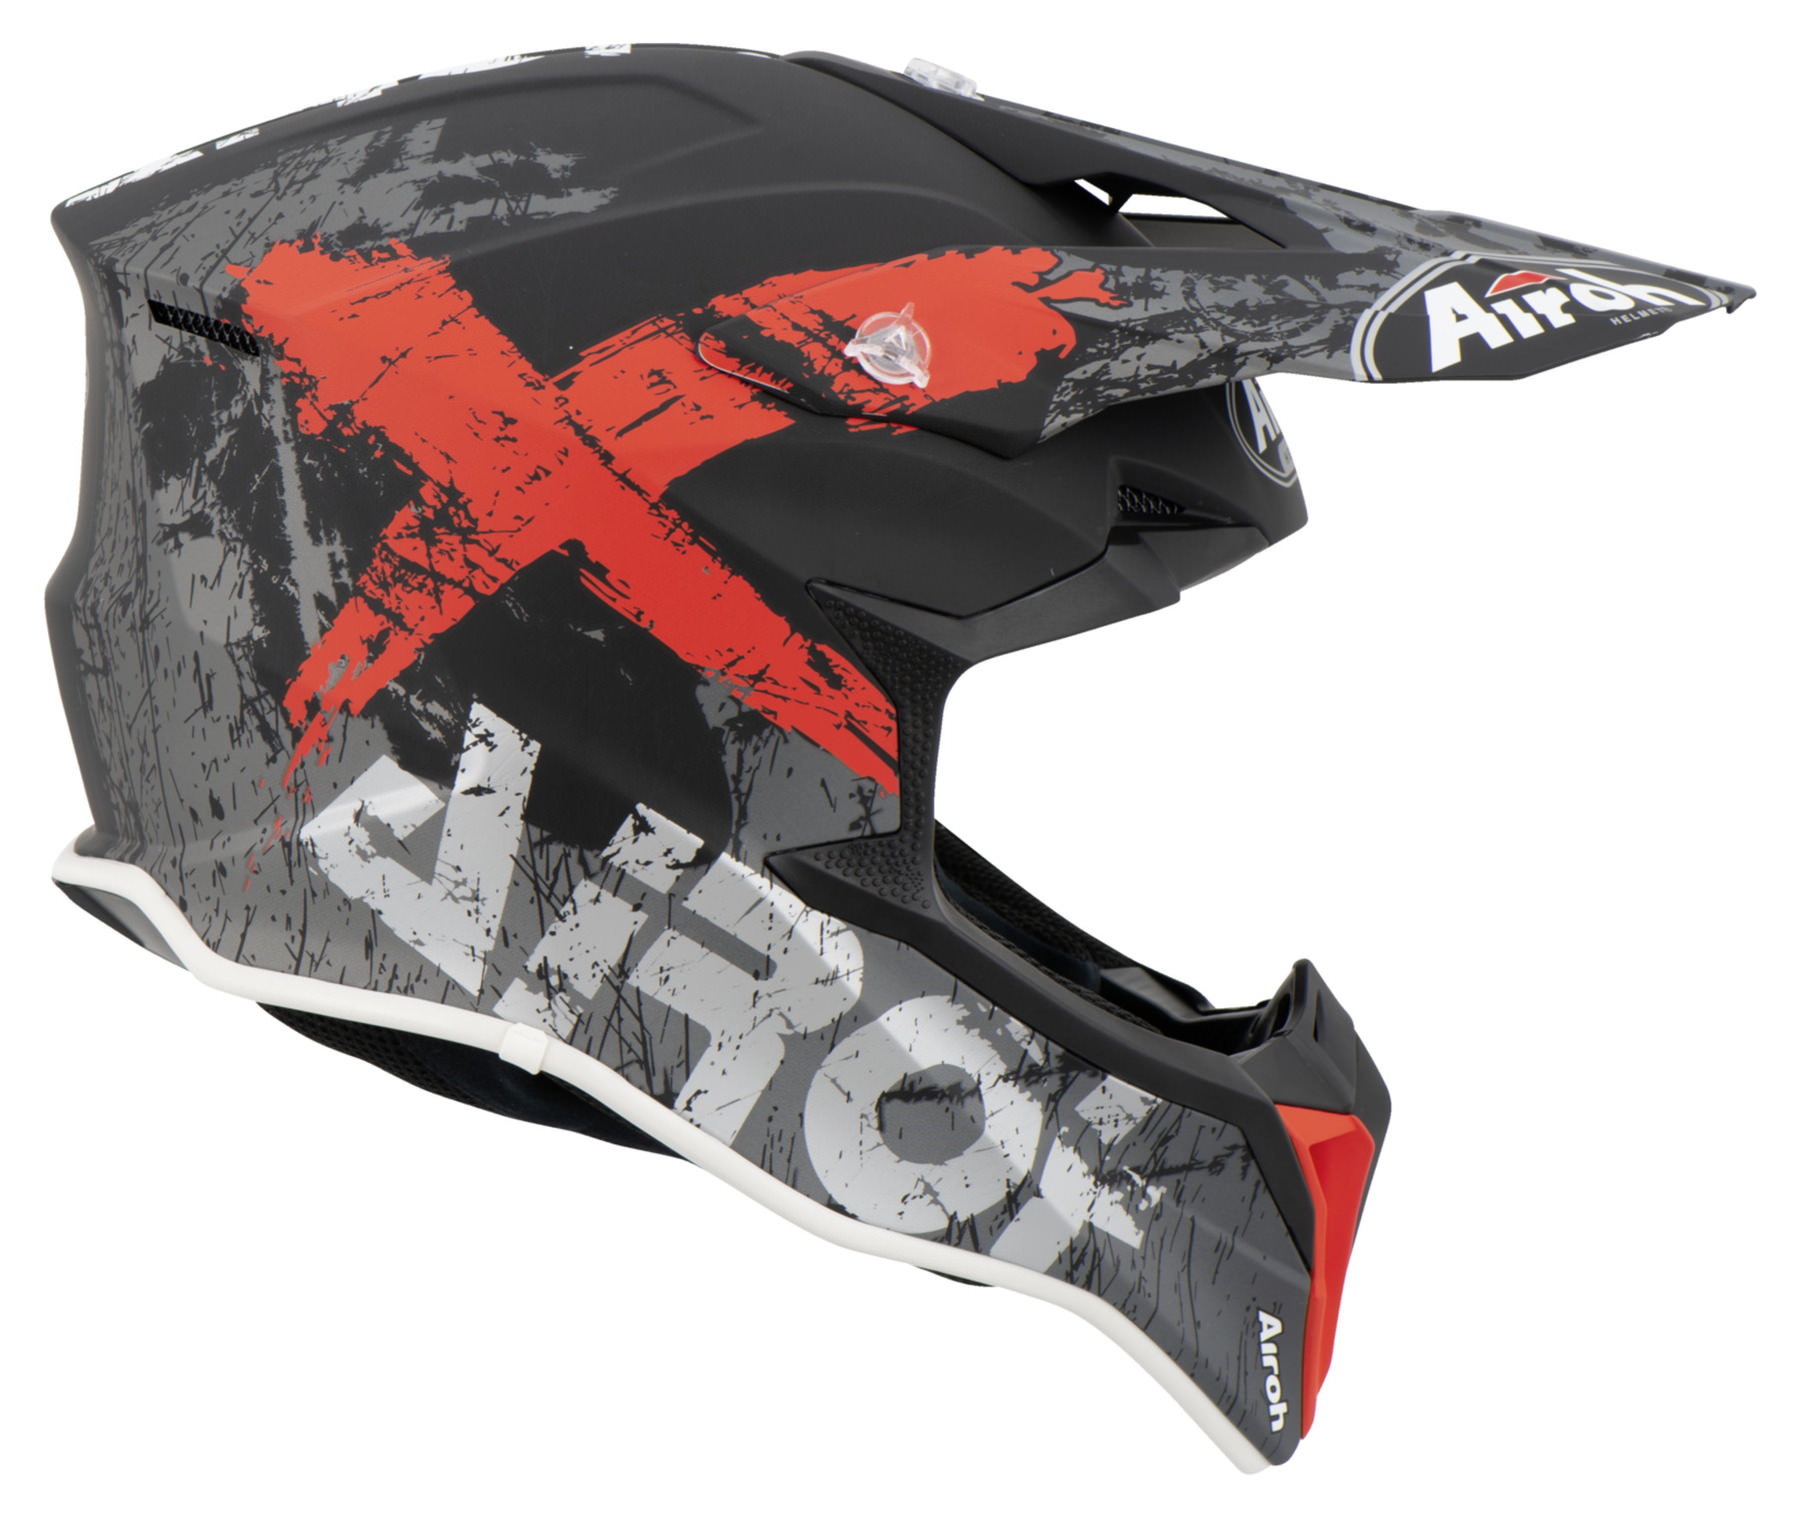 Buy Airoh Wraap Smile motocross helmet | Louis motorcycle clothing and technology